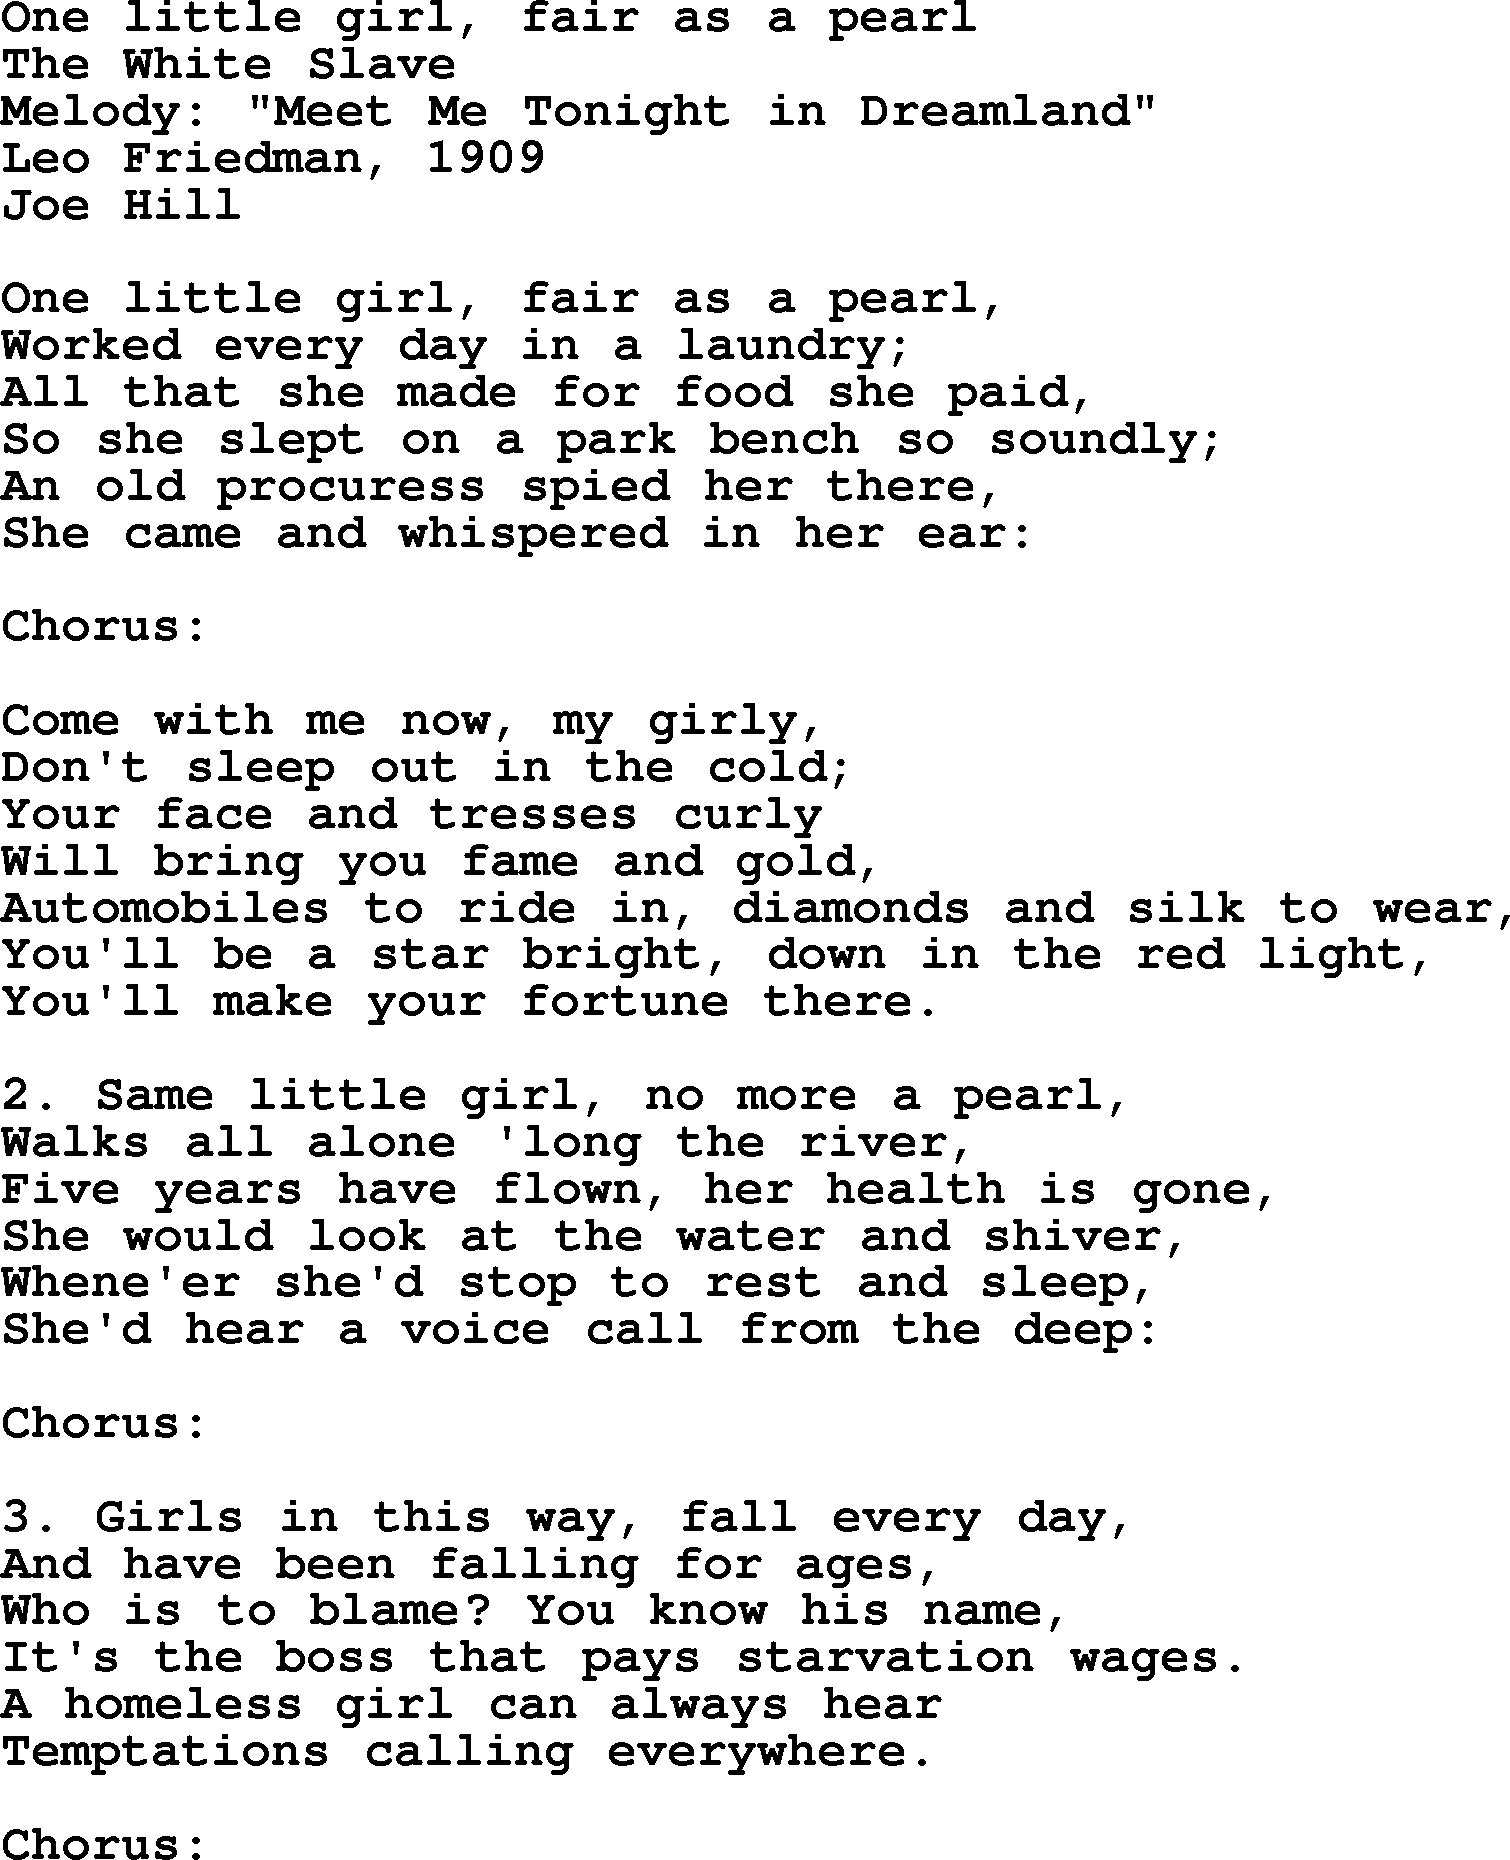 Political, Solidarity, Workers or Union song: One Little Girl Fair As A Pearl, lyrics